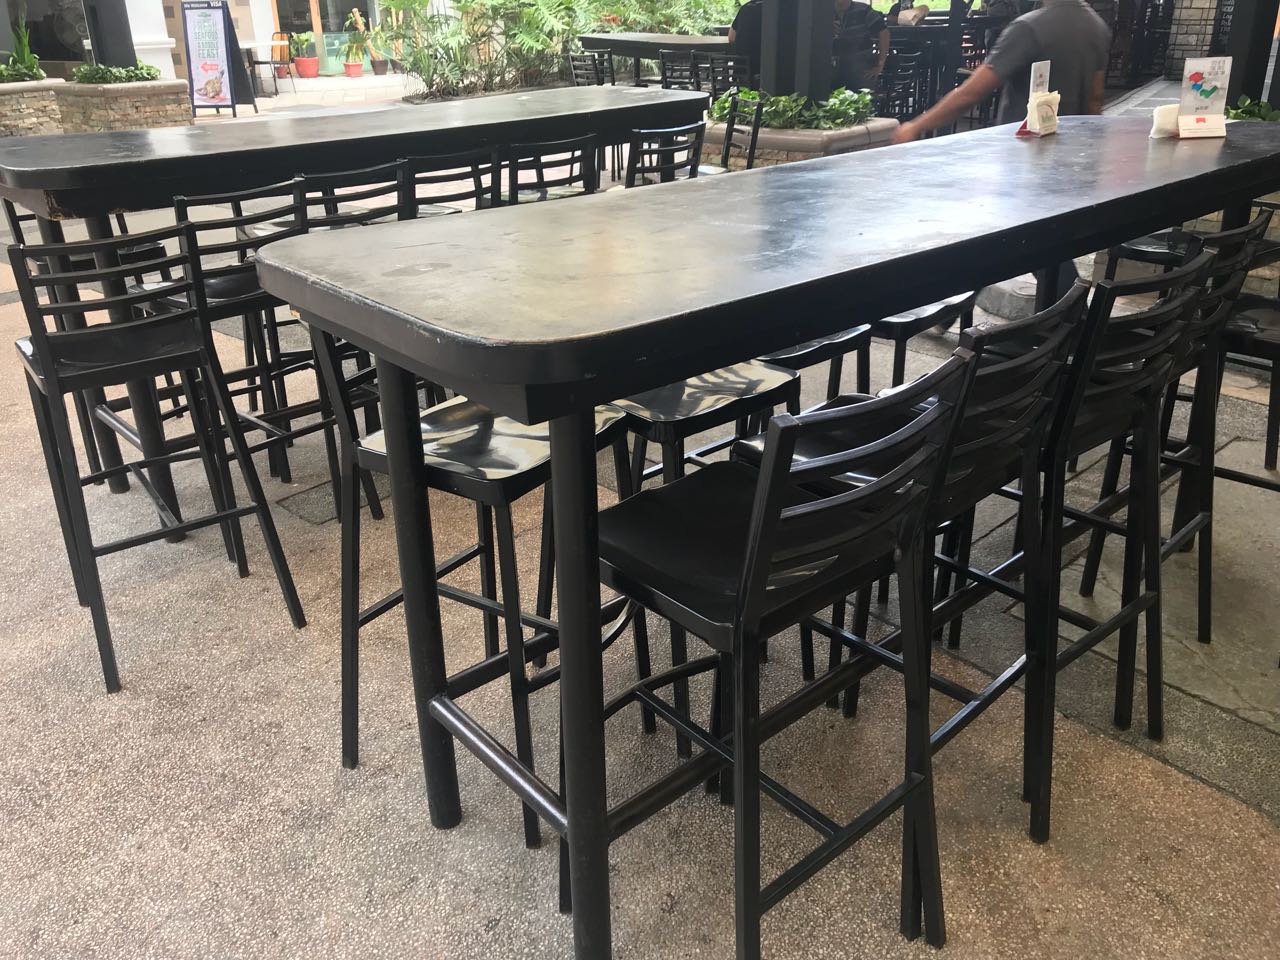 Megaoffice Surplus Philippines Used Bar Chair And Table For Sale